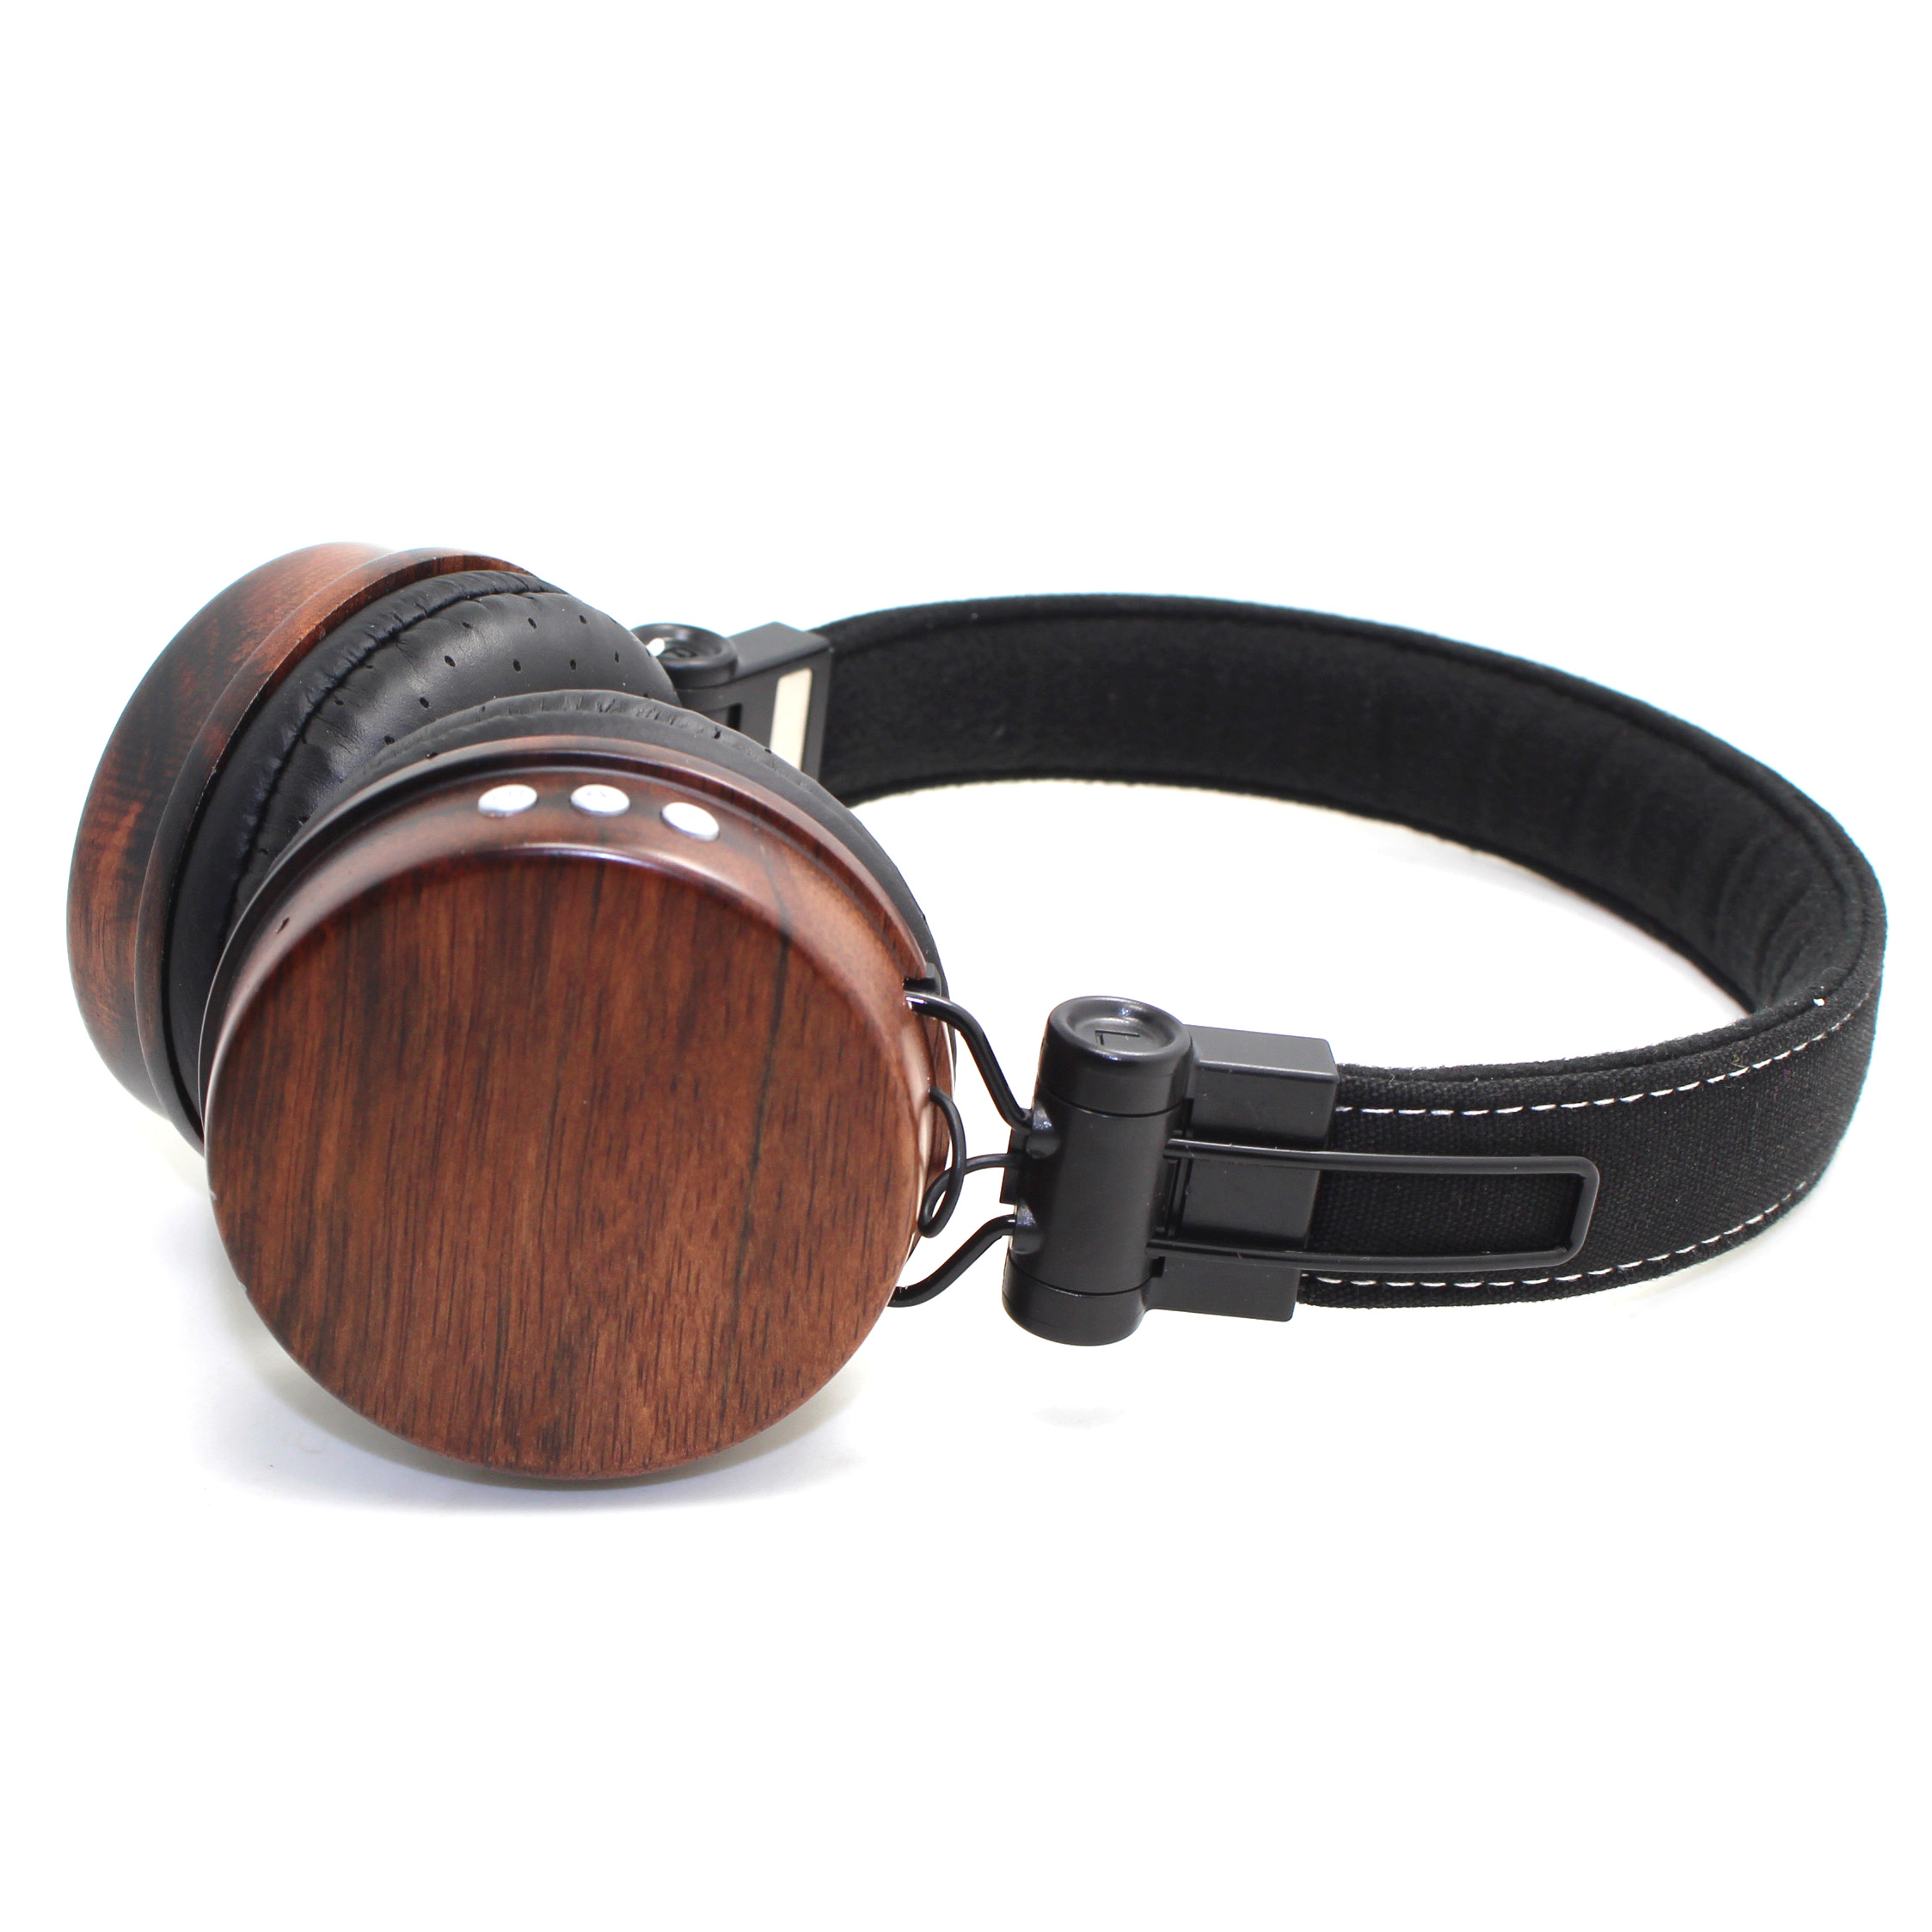 OEM-BL158 bluetooth headphone stand wood call center With Discount(4)